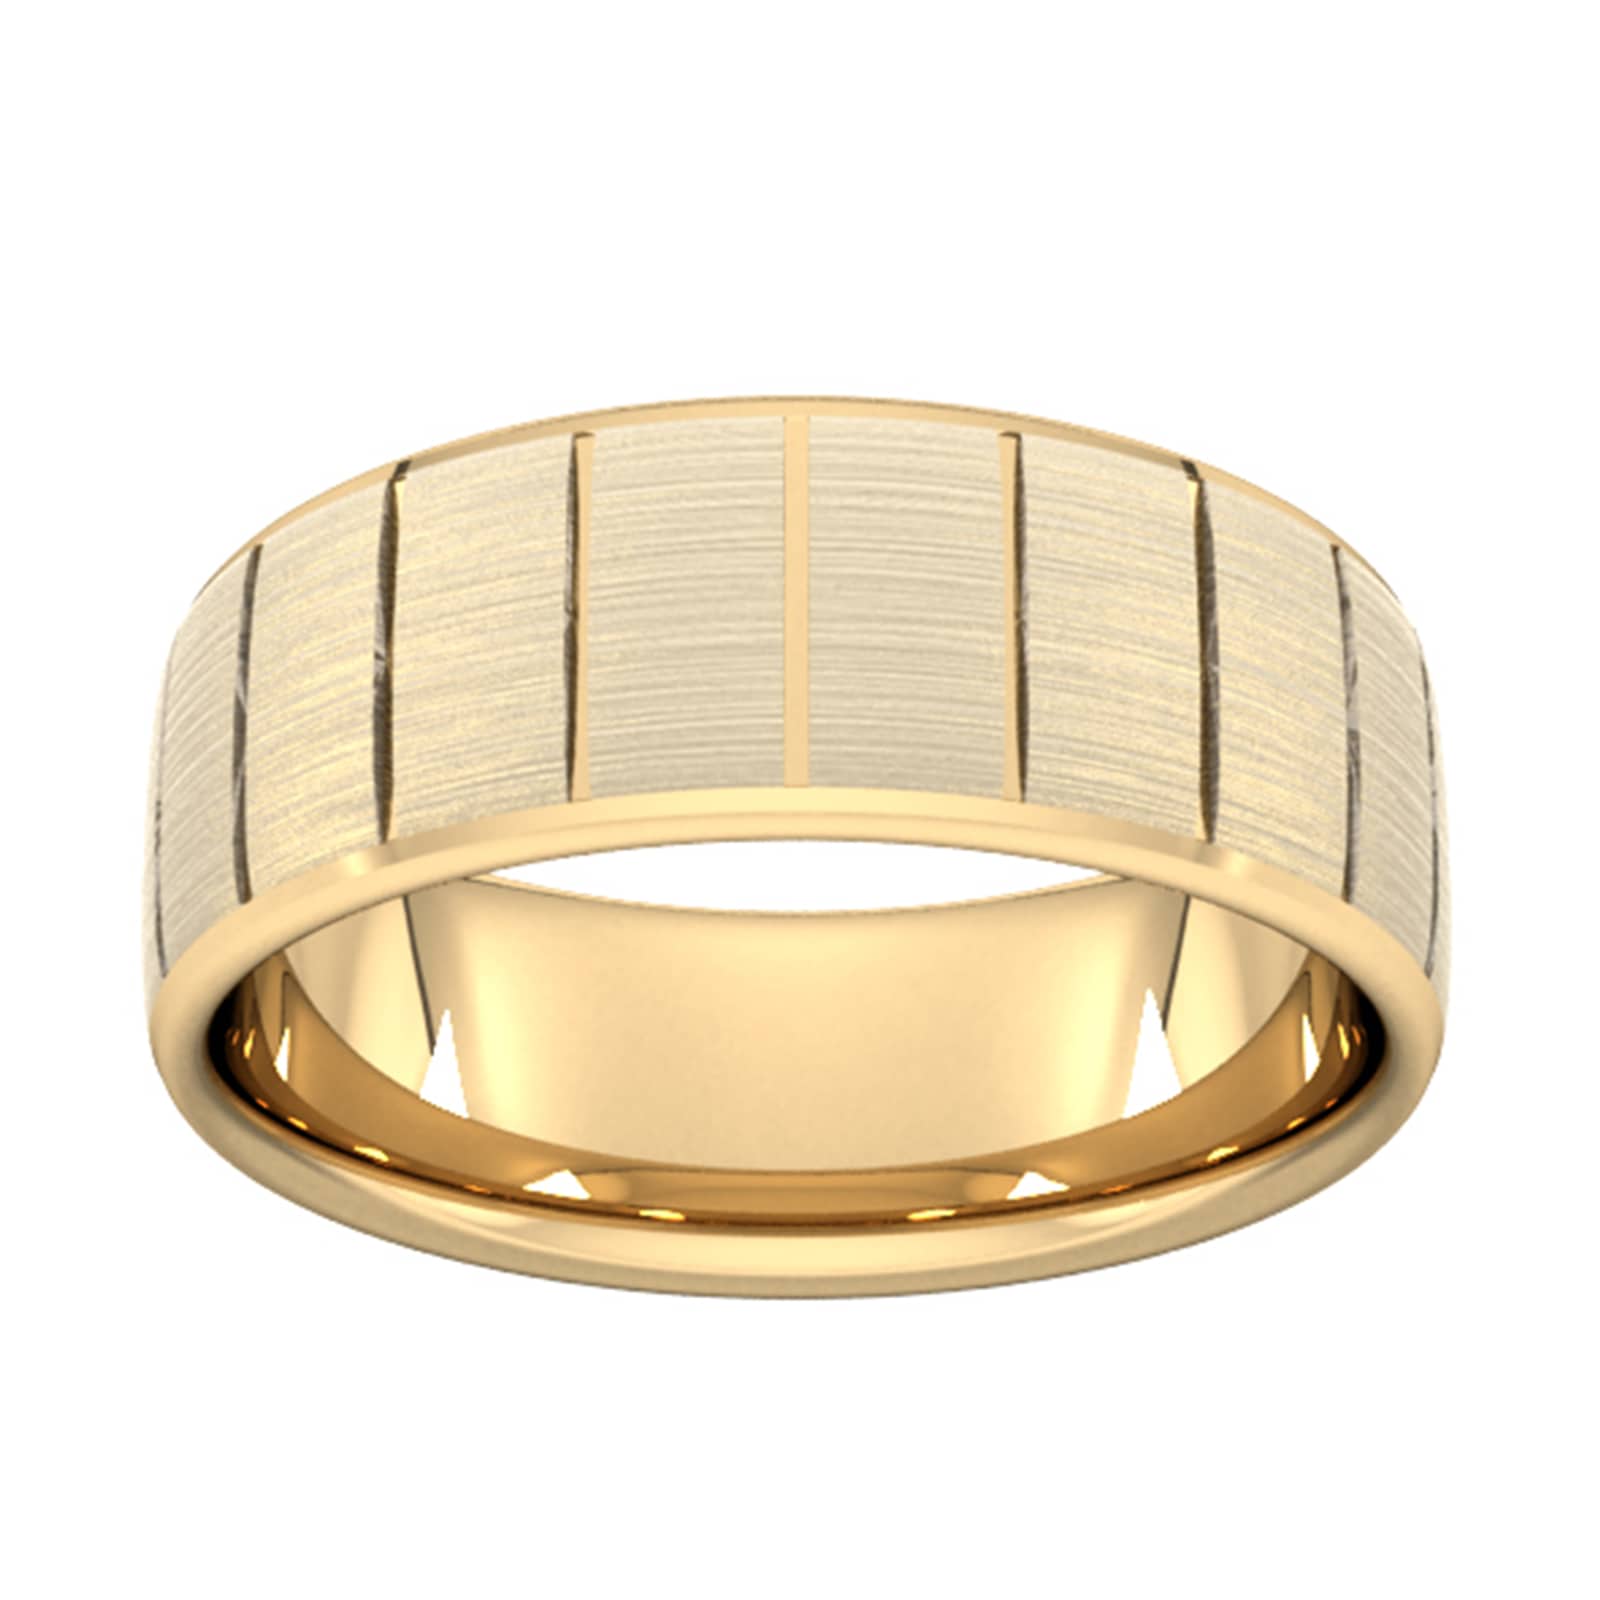 8mm Traditional Court Standard Vertical Lines Wedding Ring In 18 Carat Yellow Gold - Ring Size S